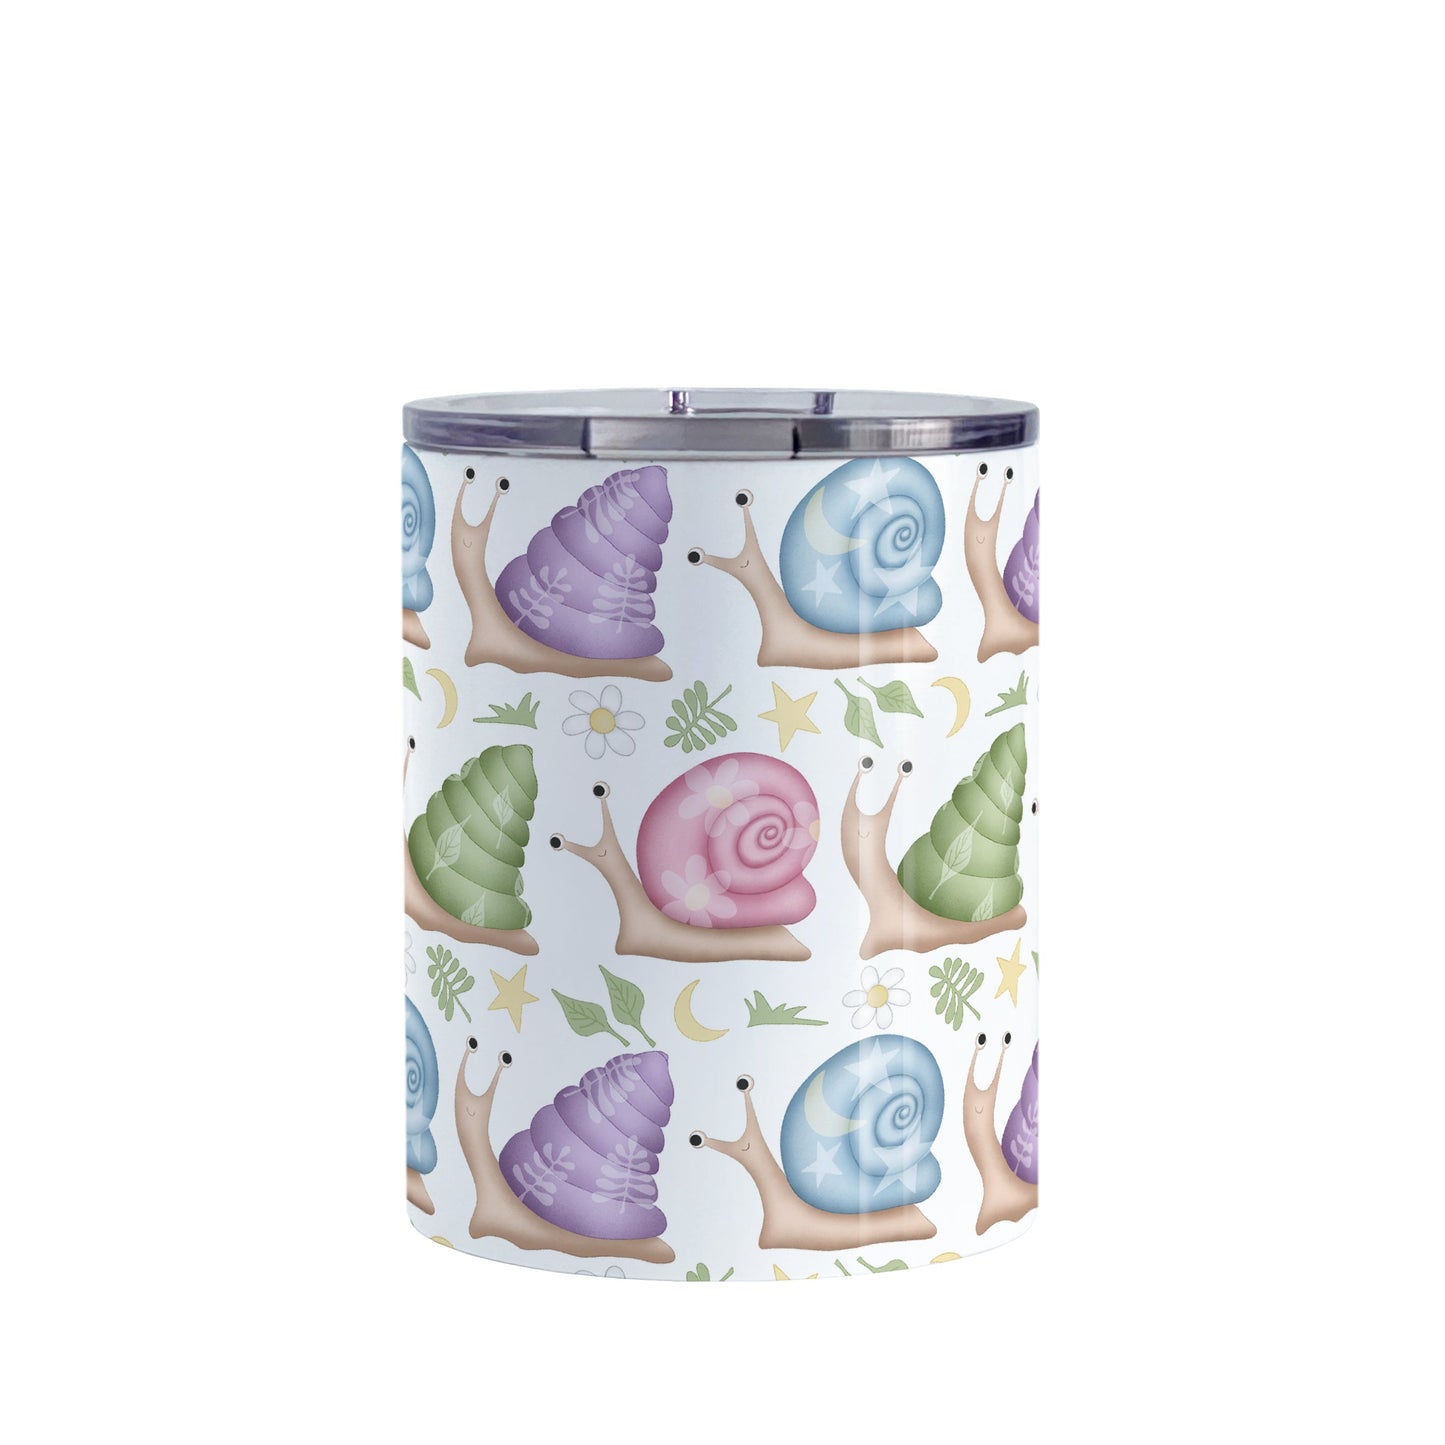 Cute Spring Summer Snails Pattern Tumbler Cup (10oz, stainless steel insulated) at Amy's Coffee Mugs. A cute snails tumbler cup with a whimsical pattern of snails with happy faces in rows around the cup with pink, purple, blue, and green shells floral and stars watermarks, with foliage, moons, and stars between the rows.